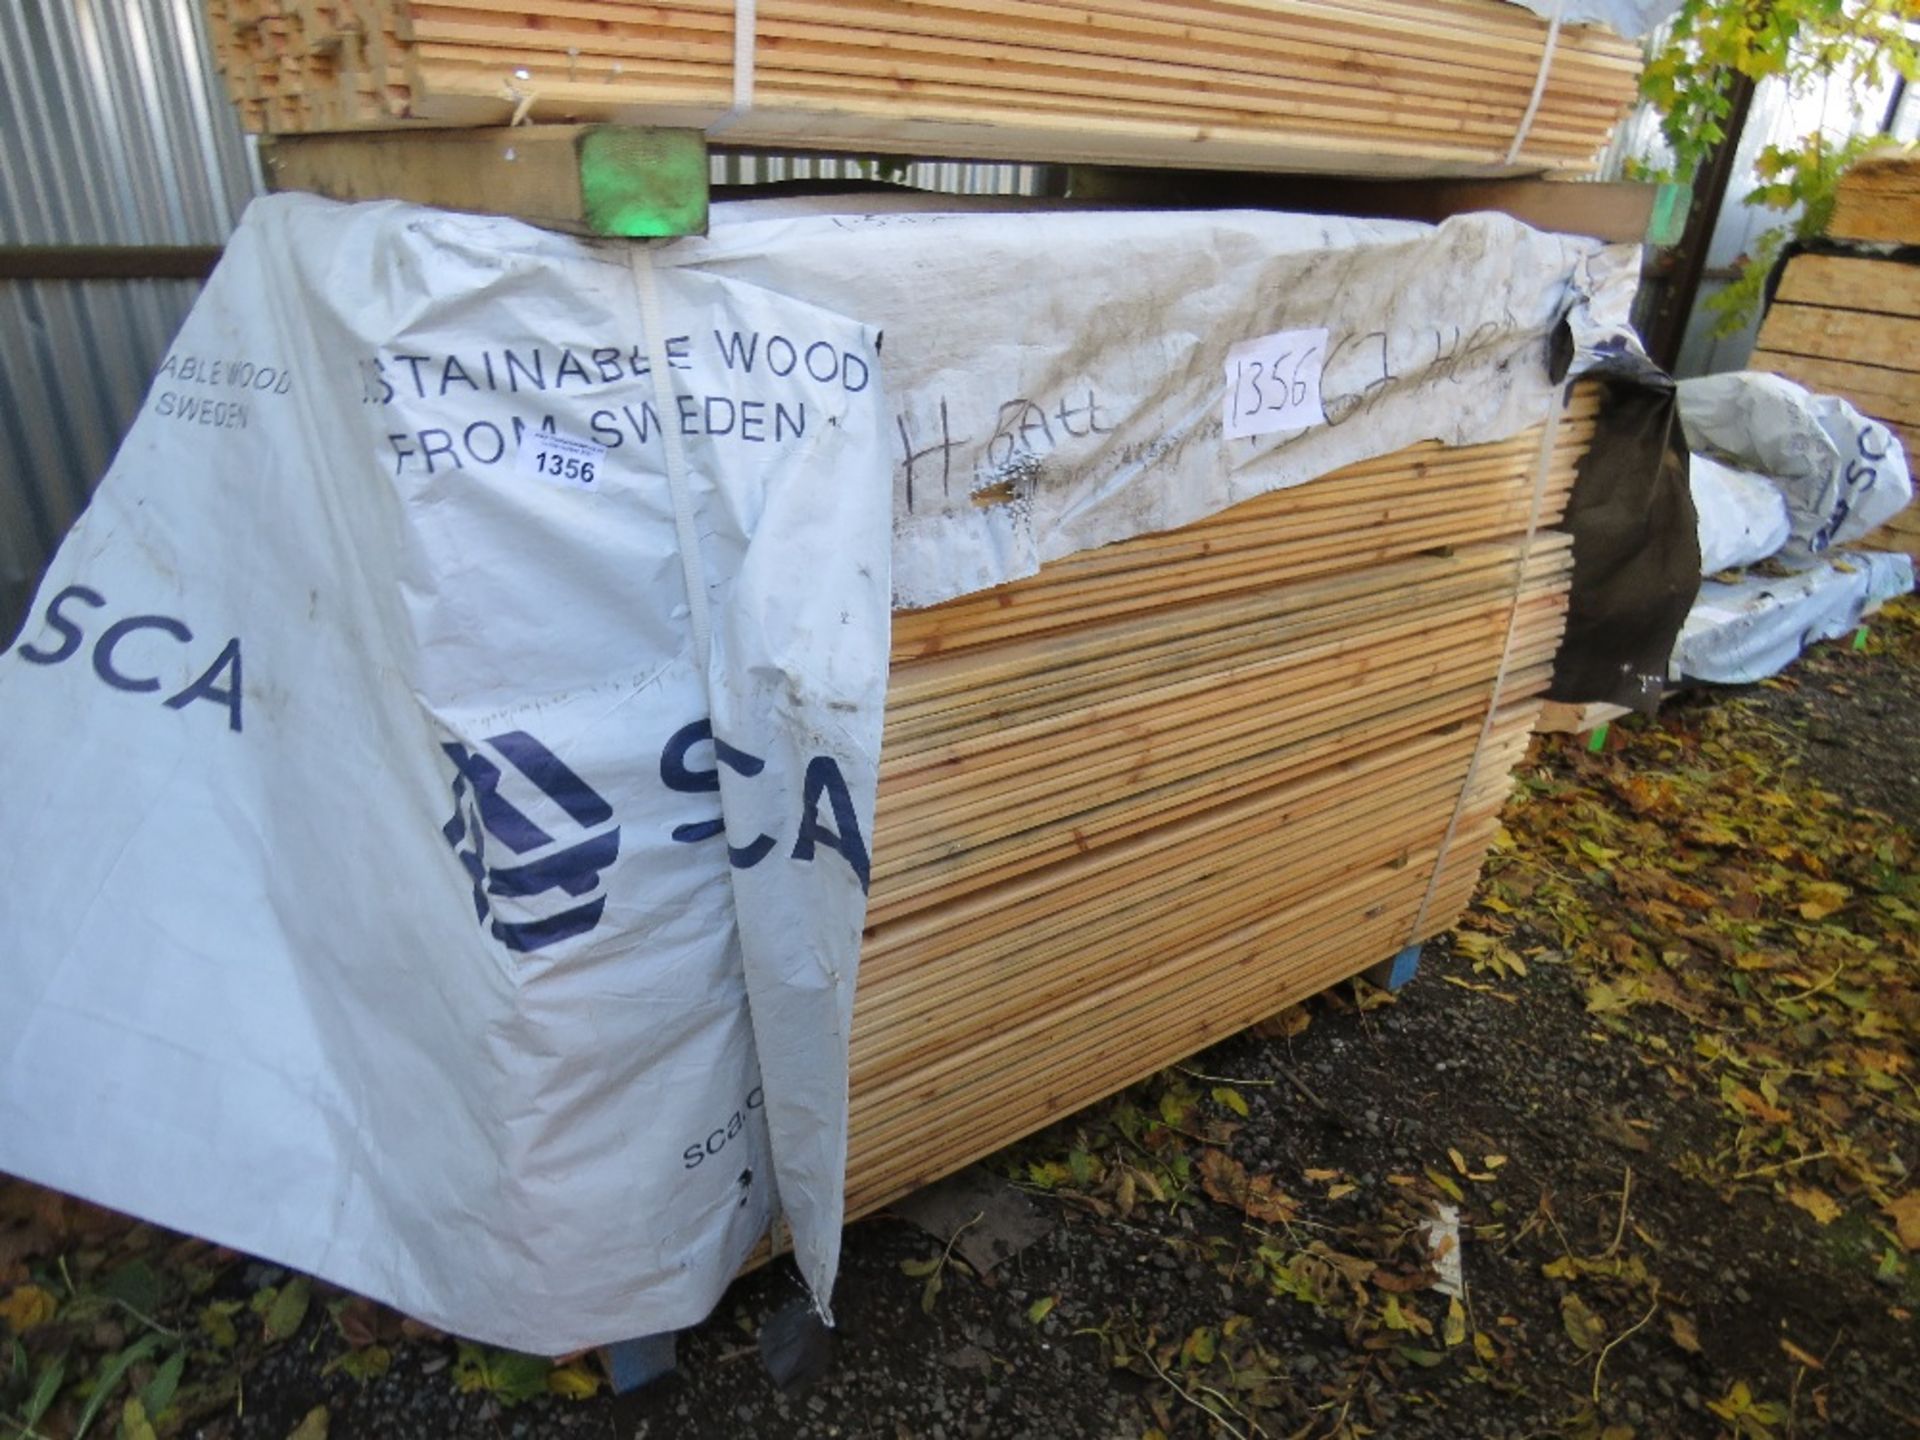 LARGE PACK OF H SECTIONED CONSTRUCTION TIMBER, UNTREATED. SIZE: 1.57M LENGTH X 55MM WIDE X 35MM DEPT